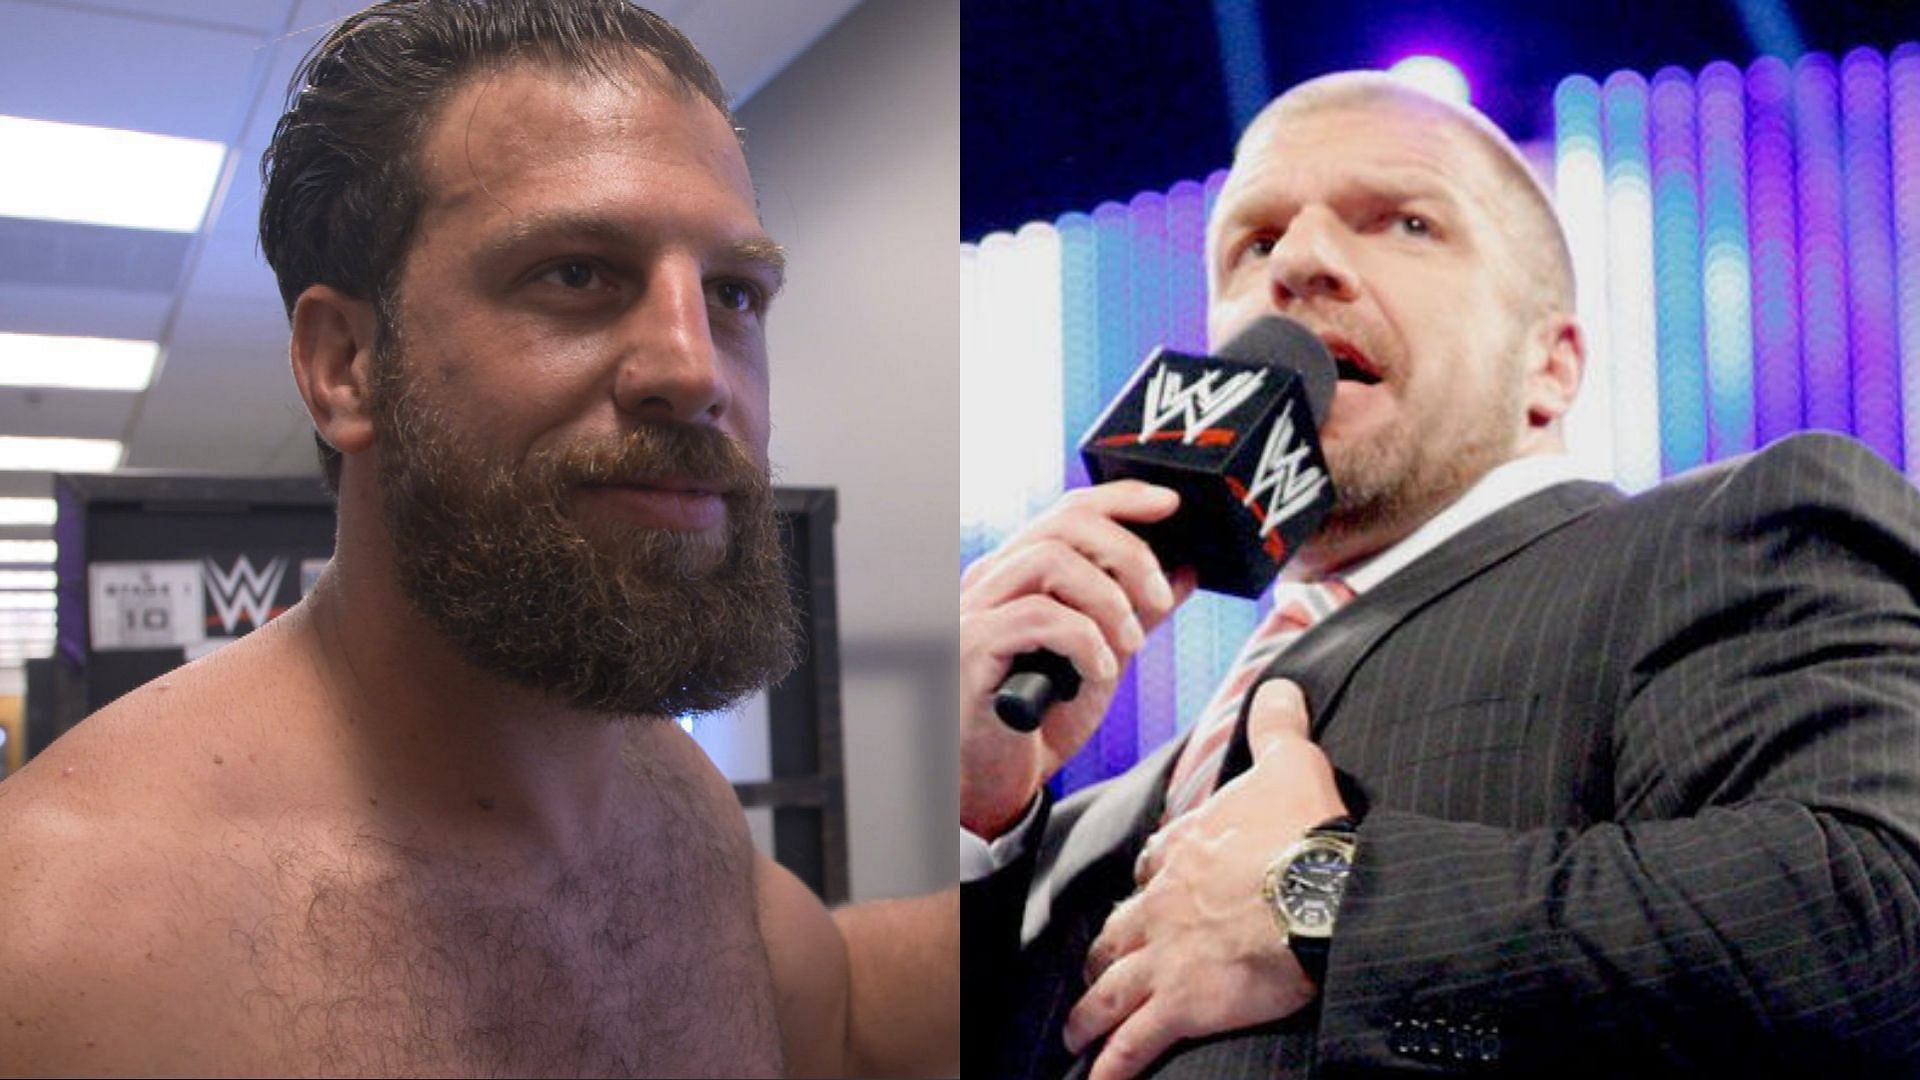 Triple H spoke about the star recently